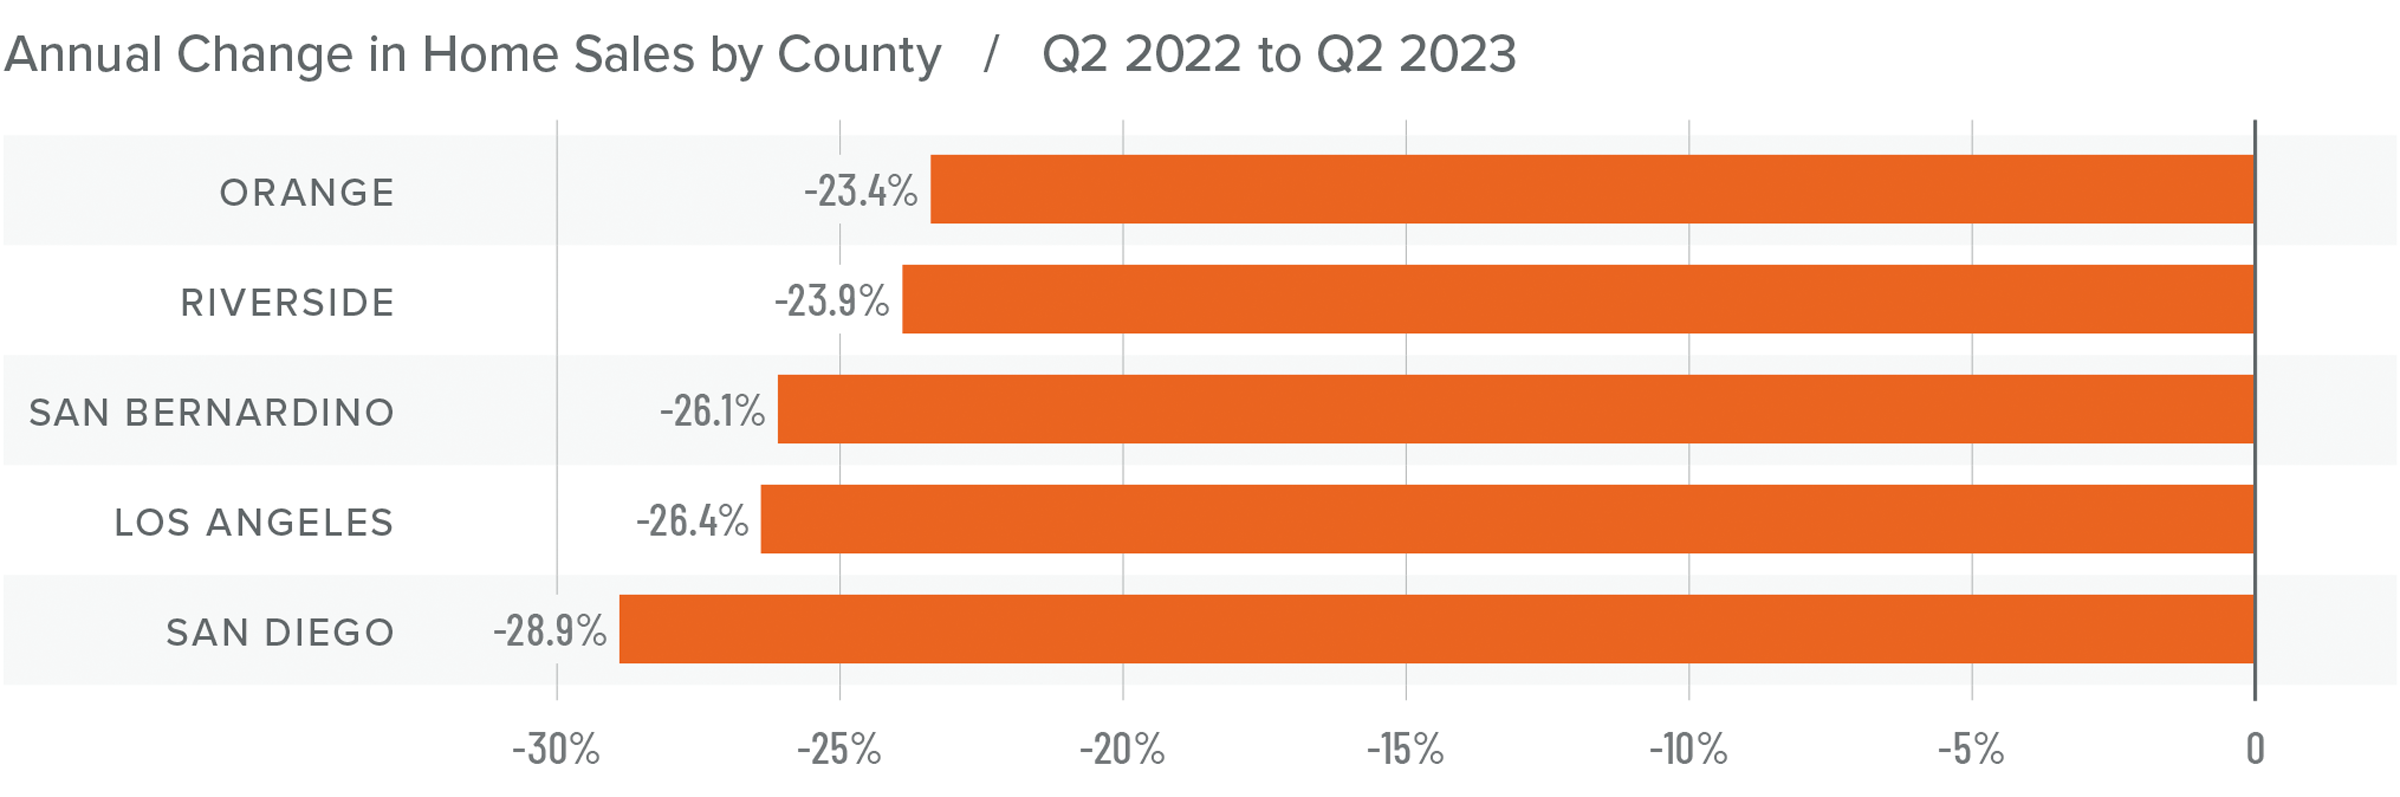 A graph showing the annual change in home sales by county for Southern California from Q2 2022 to Q2 2023. Orange had the least drastic change at -23.4%, while San Diego had the most largest change at -28.9%.